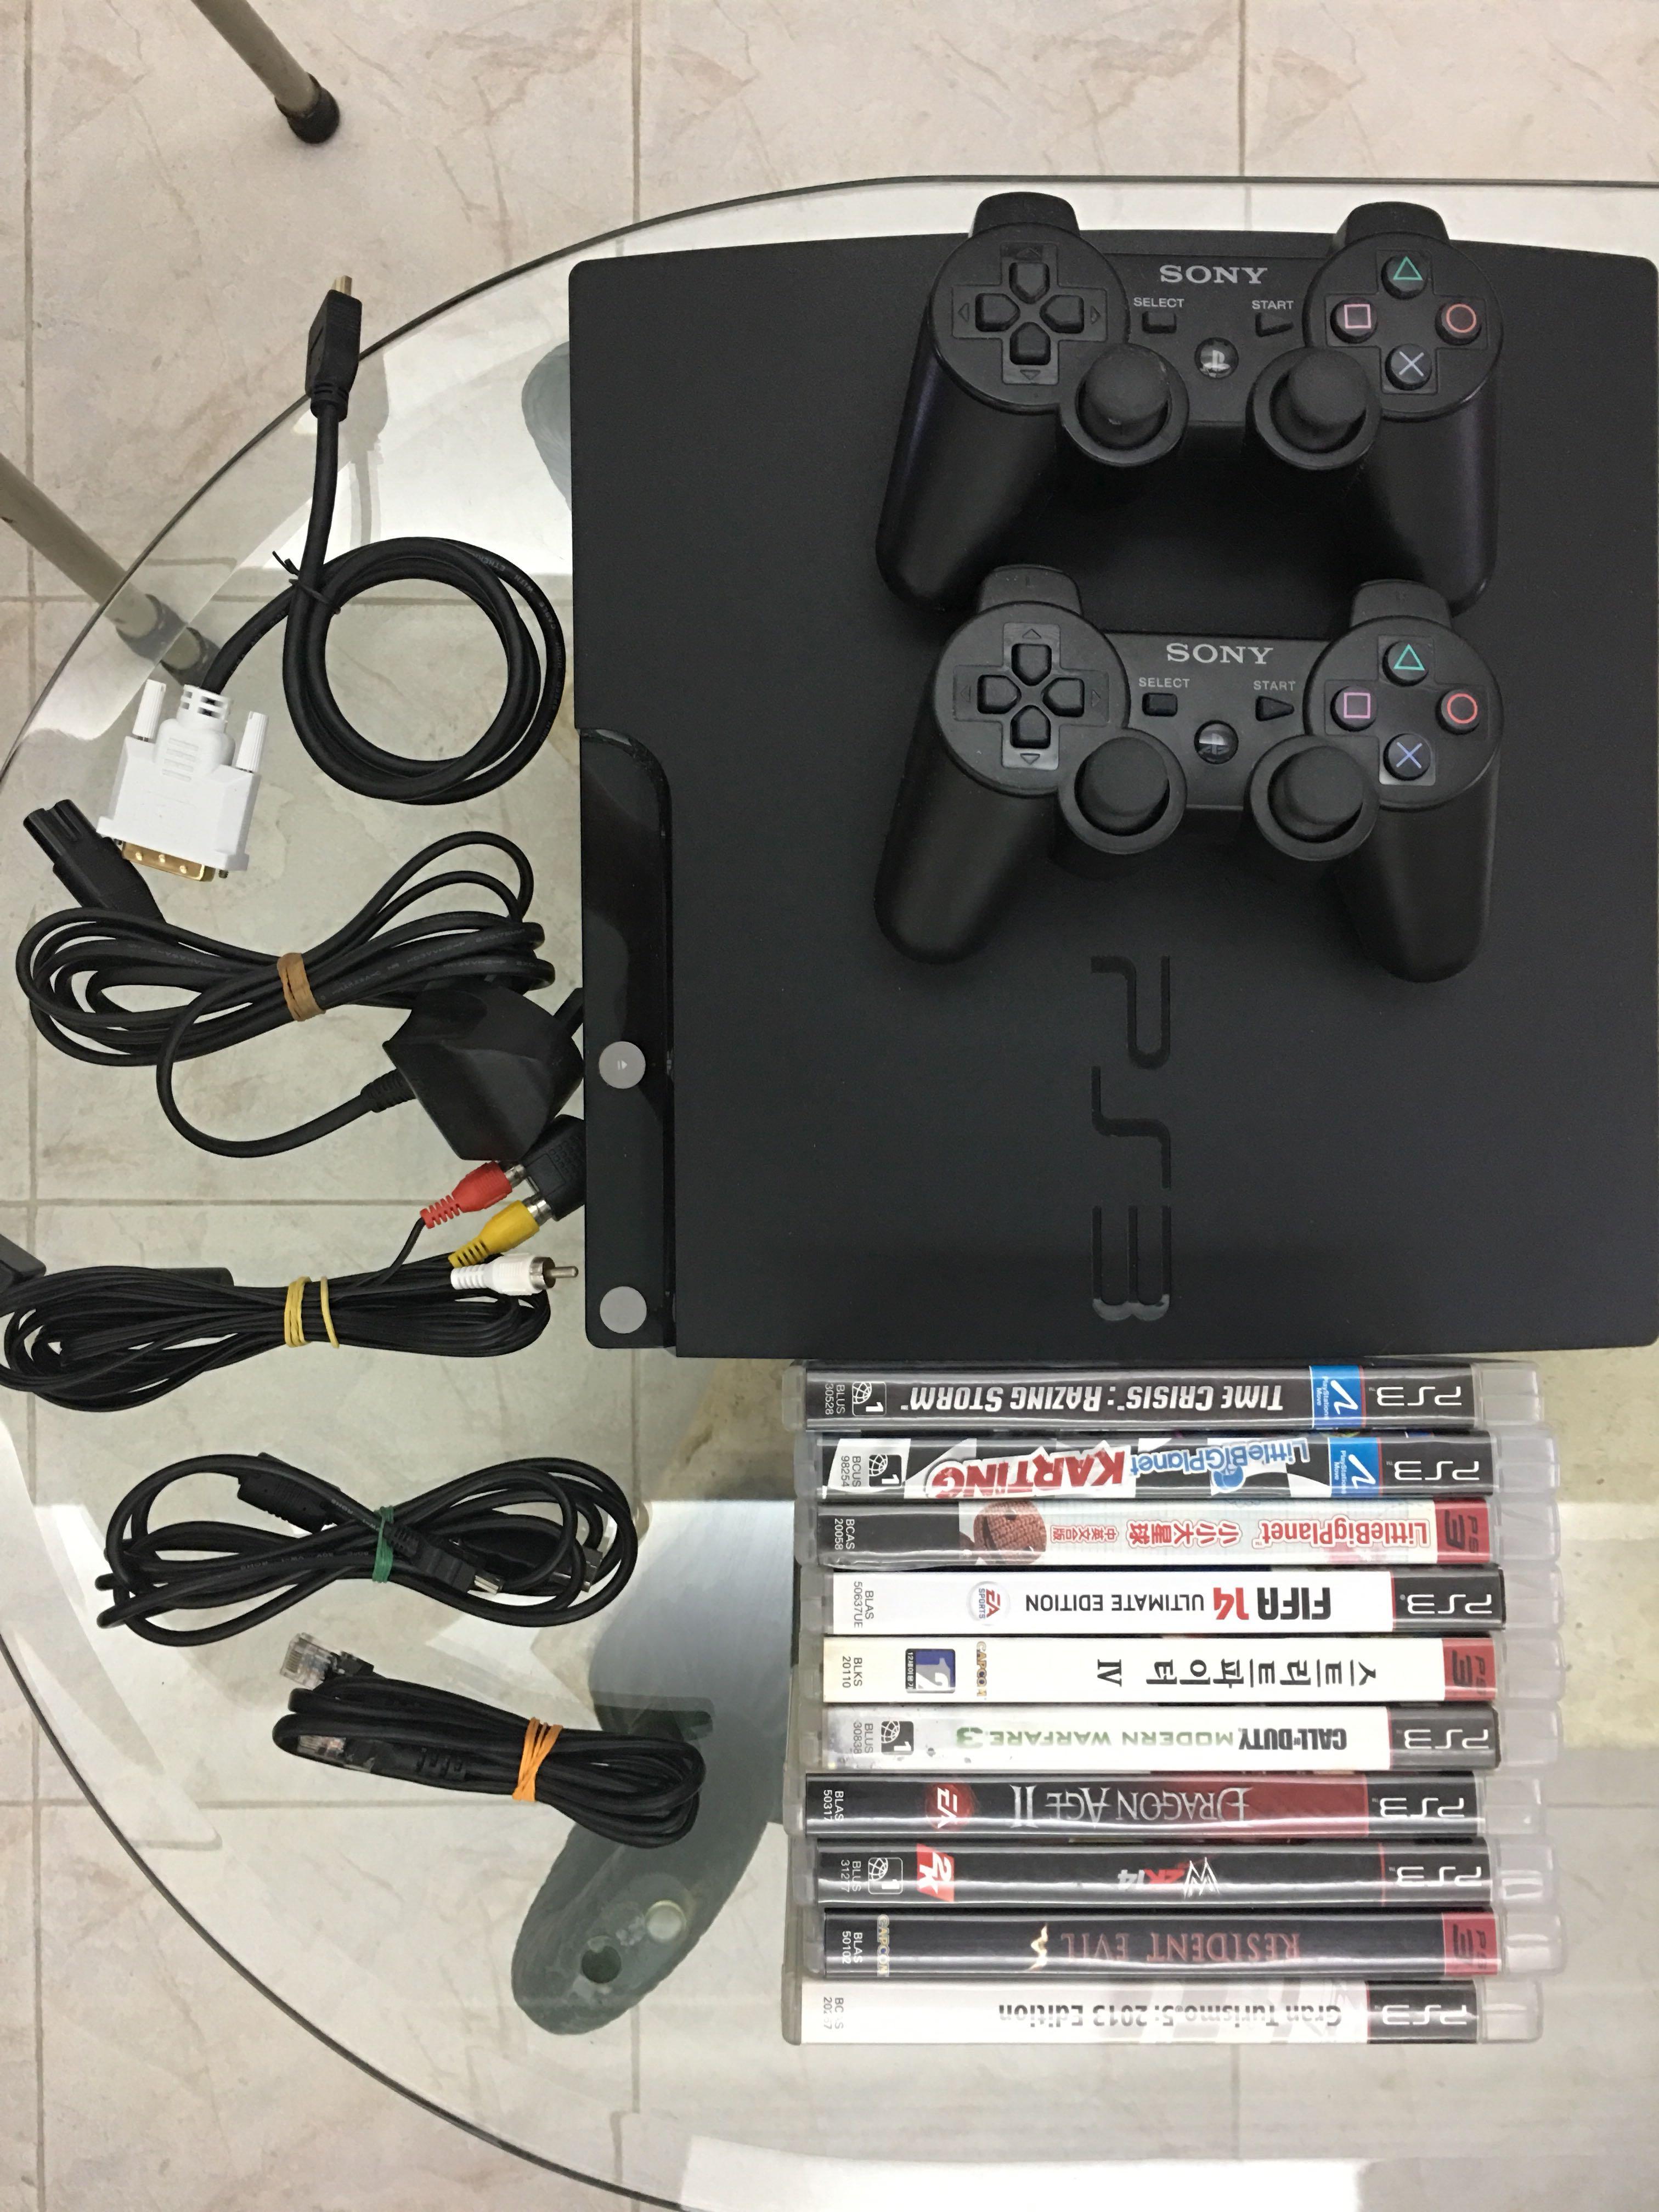 2nd hand ps3 console